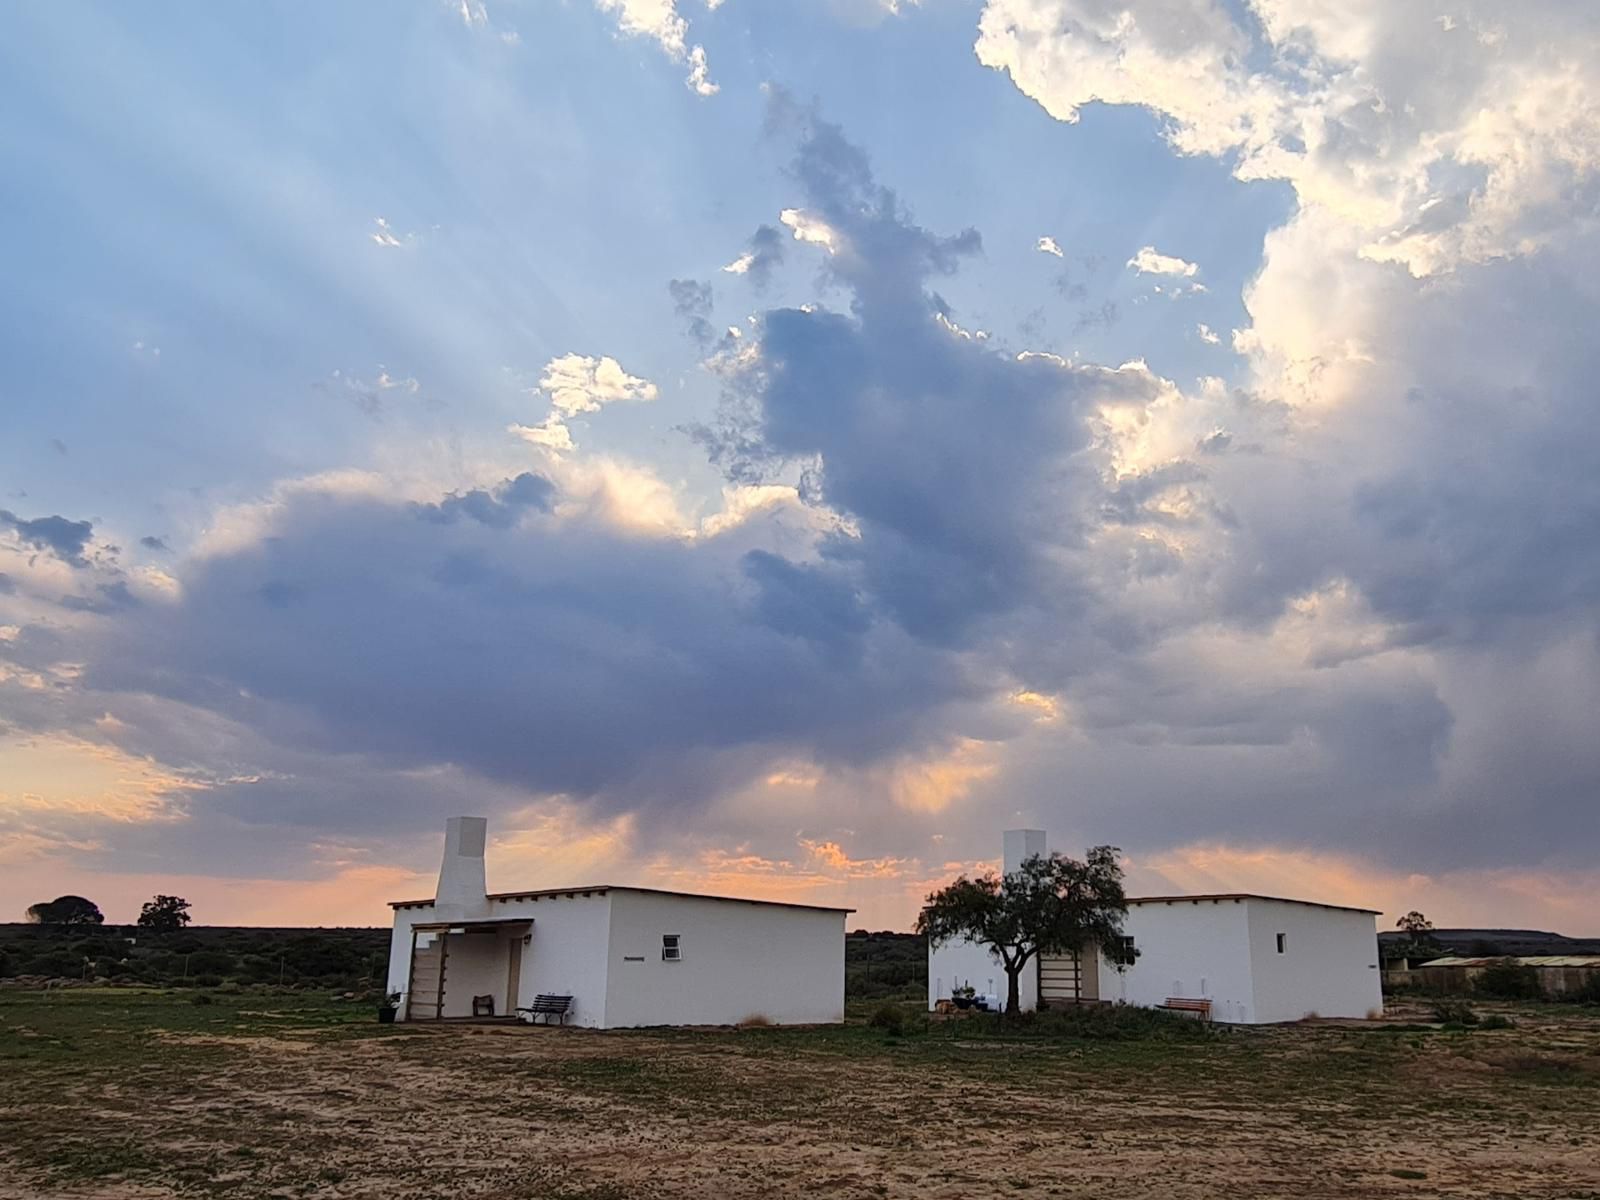 Willemsrivier Trekpad Guest Houses Nieuwoudtville Northern Cape South Africa Barn, Building, Architecture, Agriculture, Wood, Sky, Nature